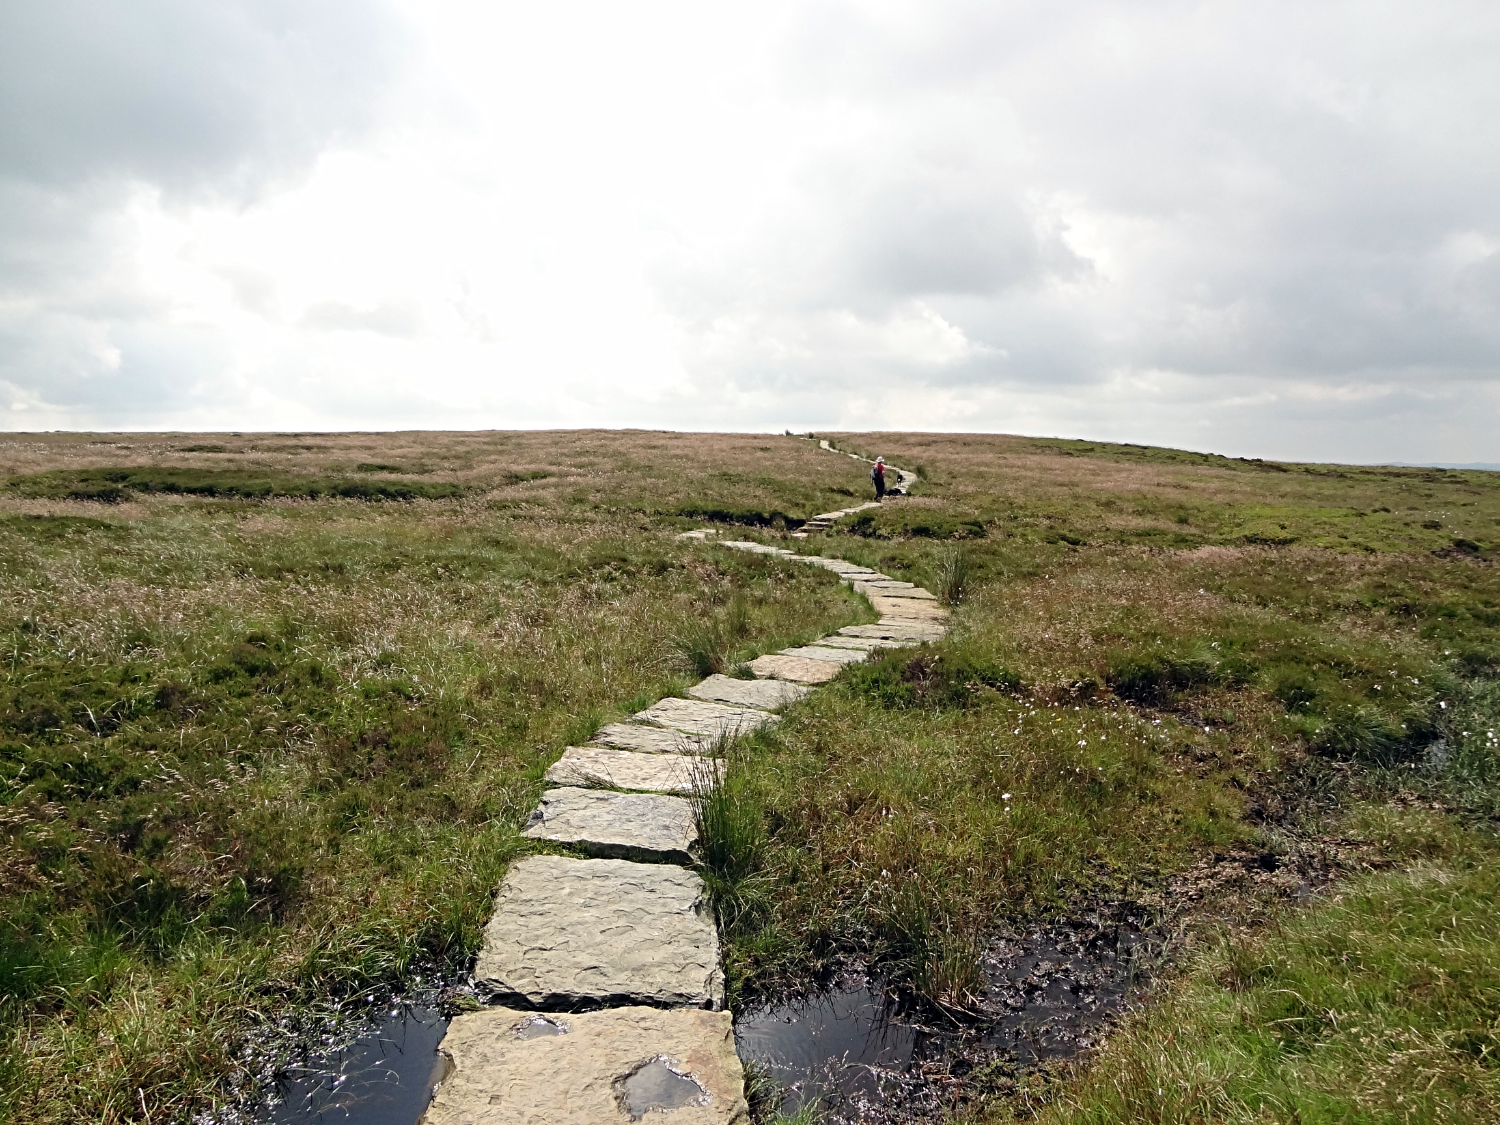 The long path from Brown Knoll to Rushup Edge